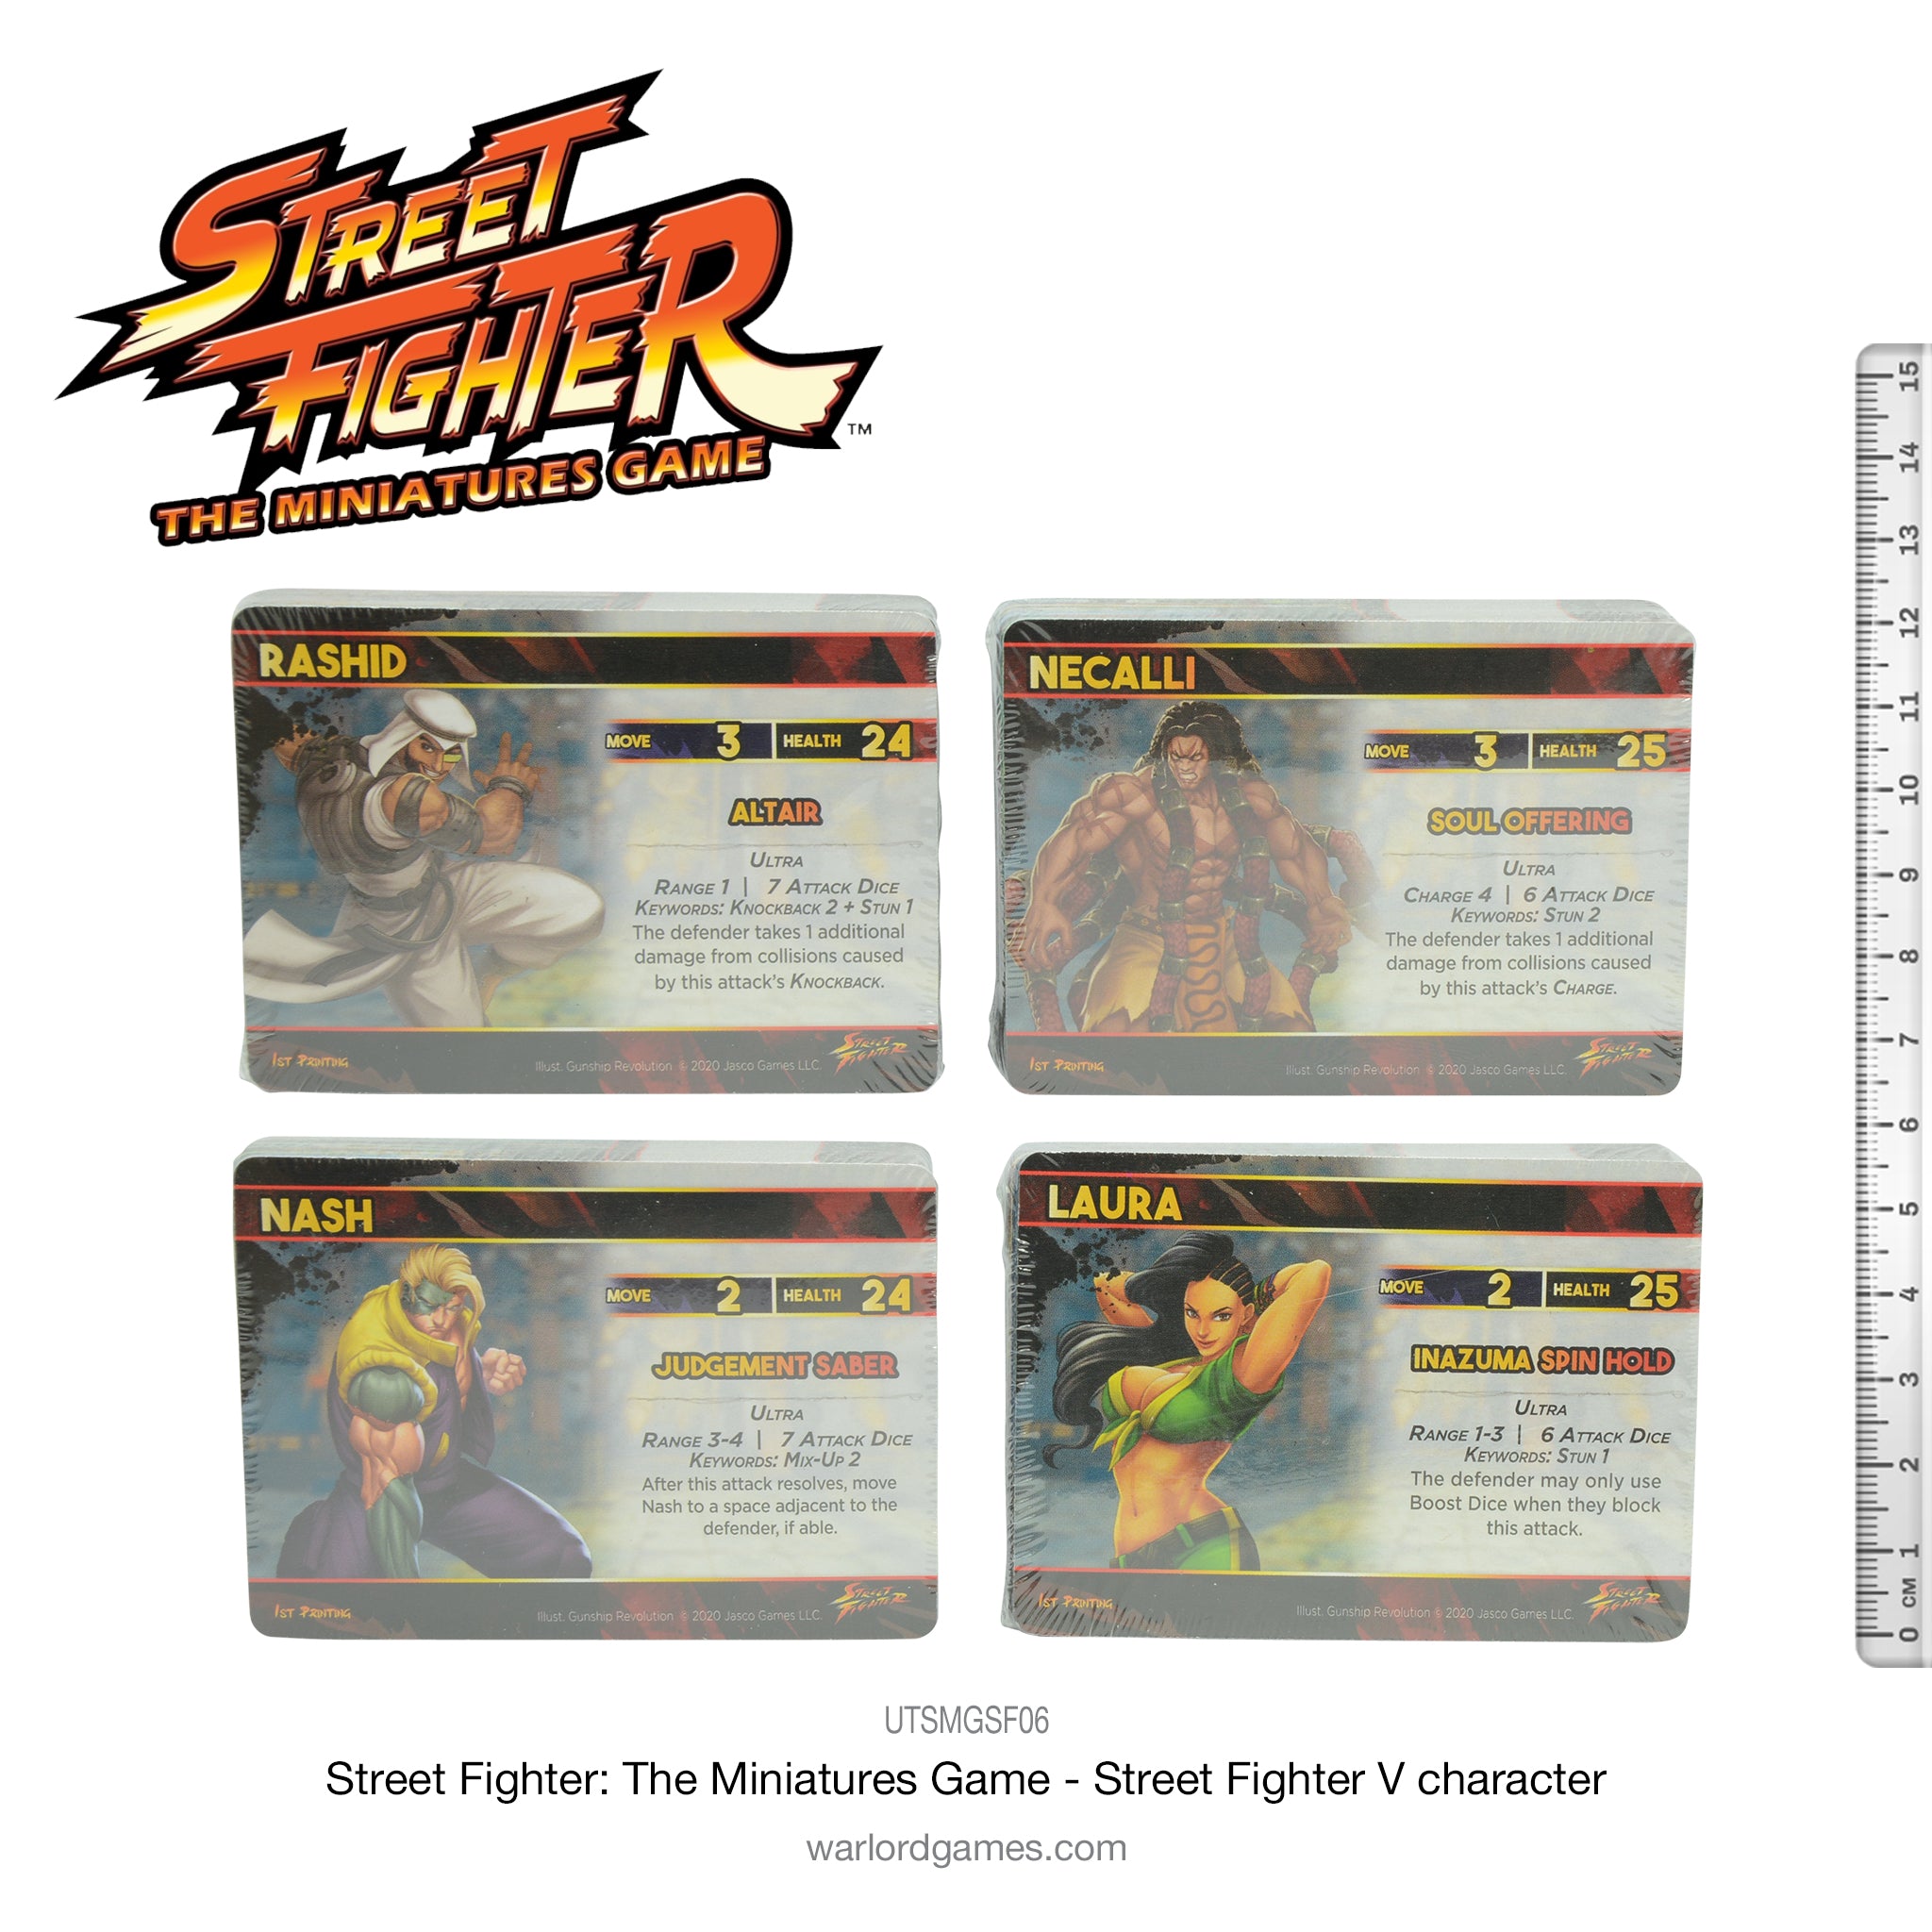 Street Fighter: The Miniatures Game - Street Fighter V character pack